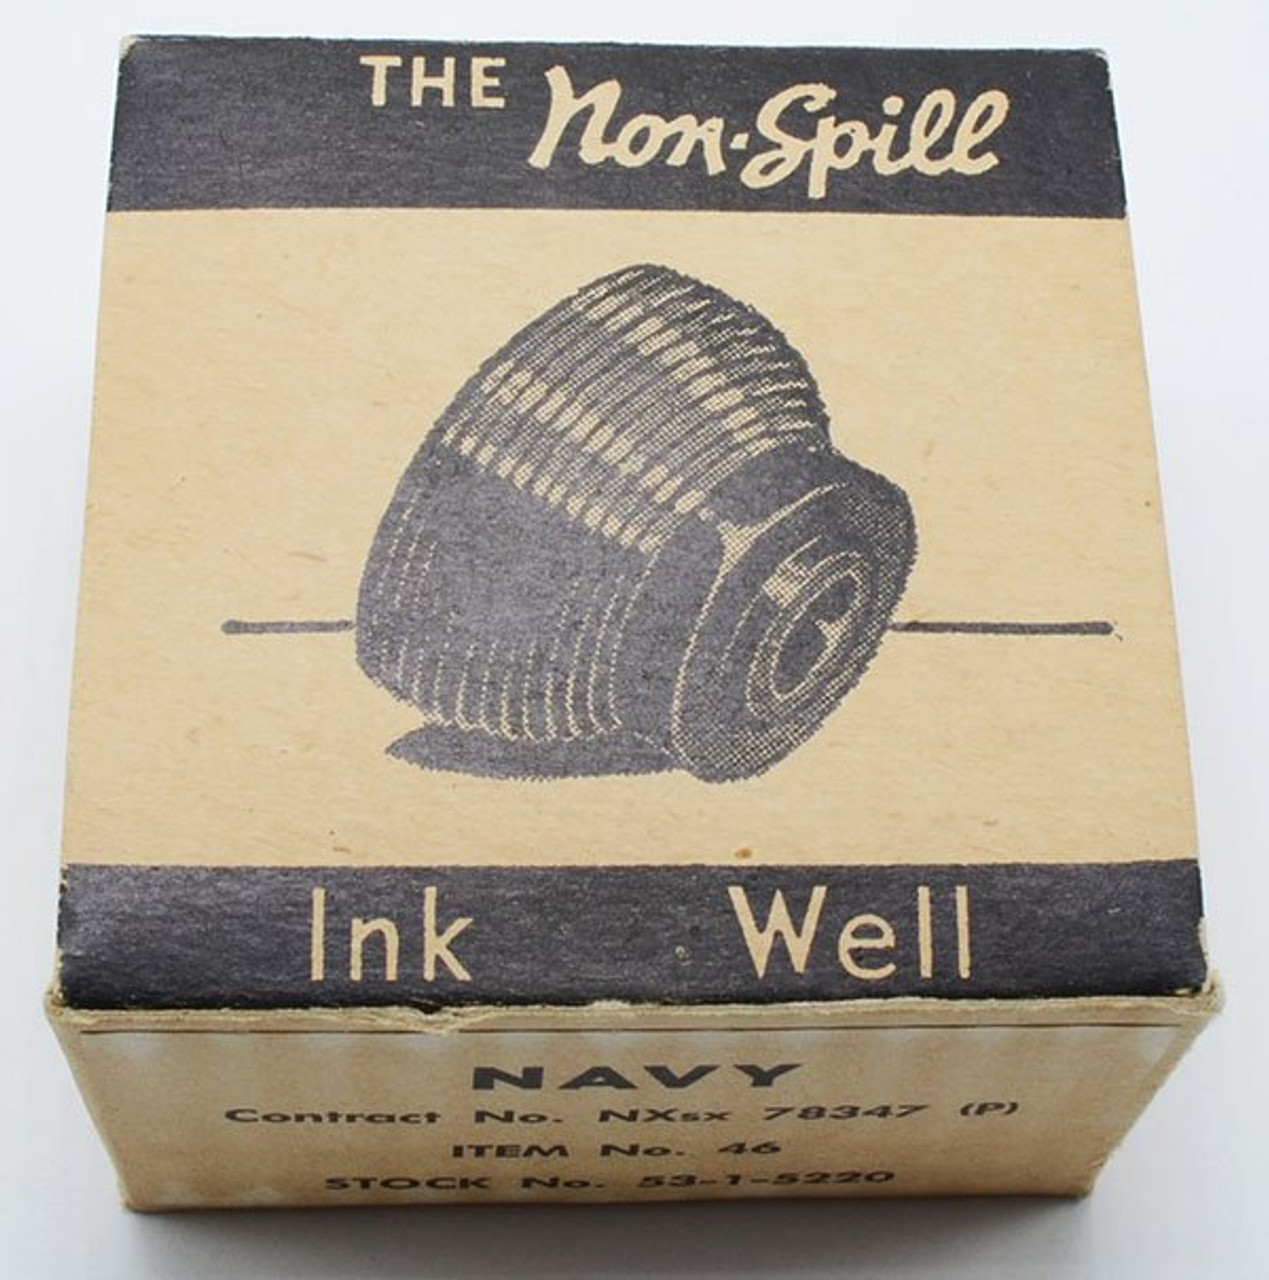 Preferred Products Non-Spill Ink Well in Box (1950 ca.)  - Vintage Glass Ink Well w Screw-On Top